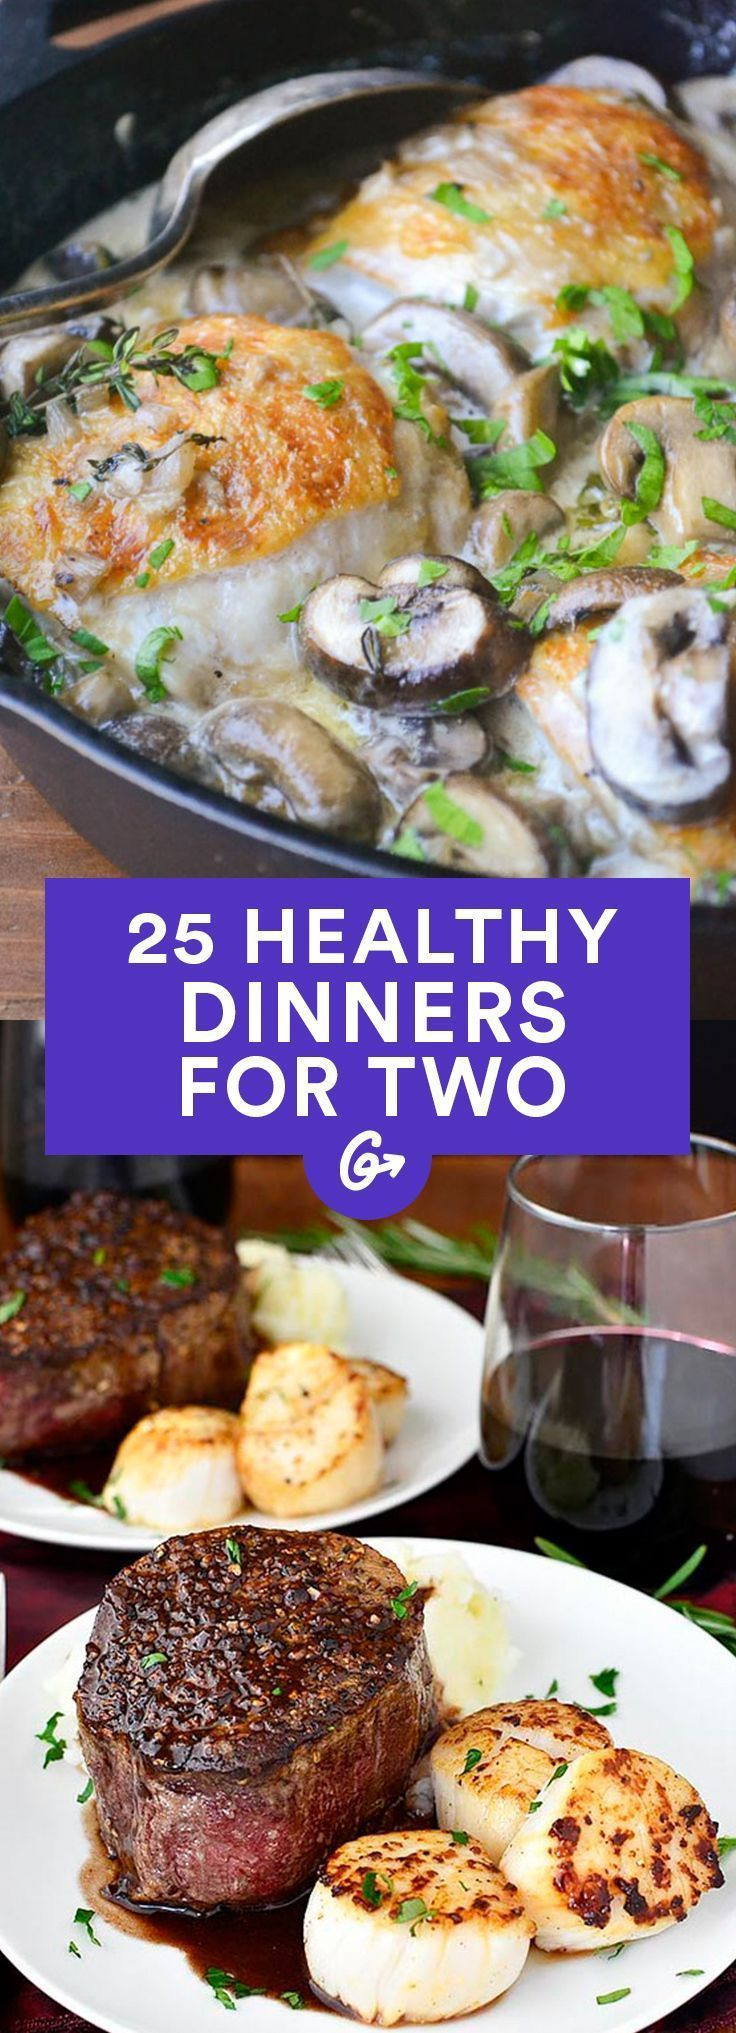 Healthy Cheap Dinners
 100 Healthy Dinner Recipes on Pinterest